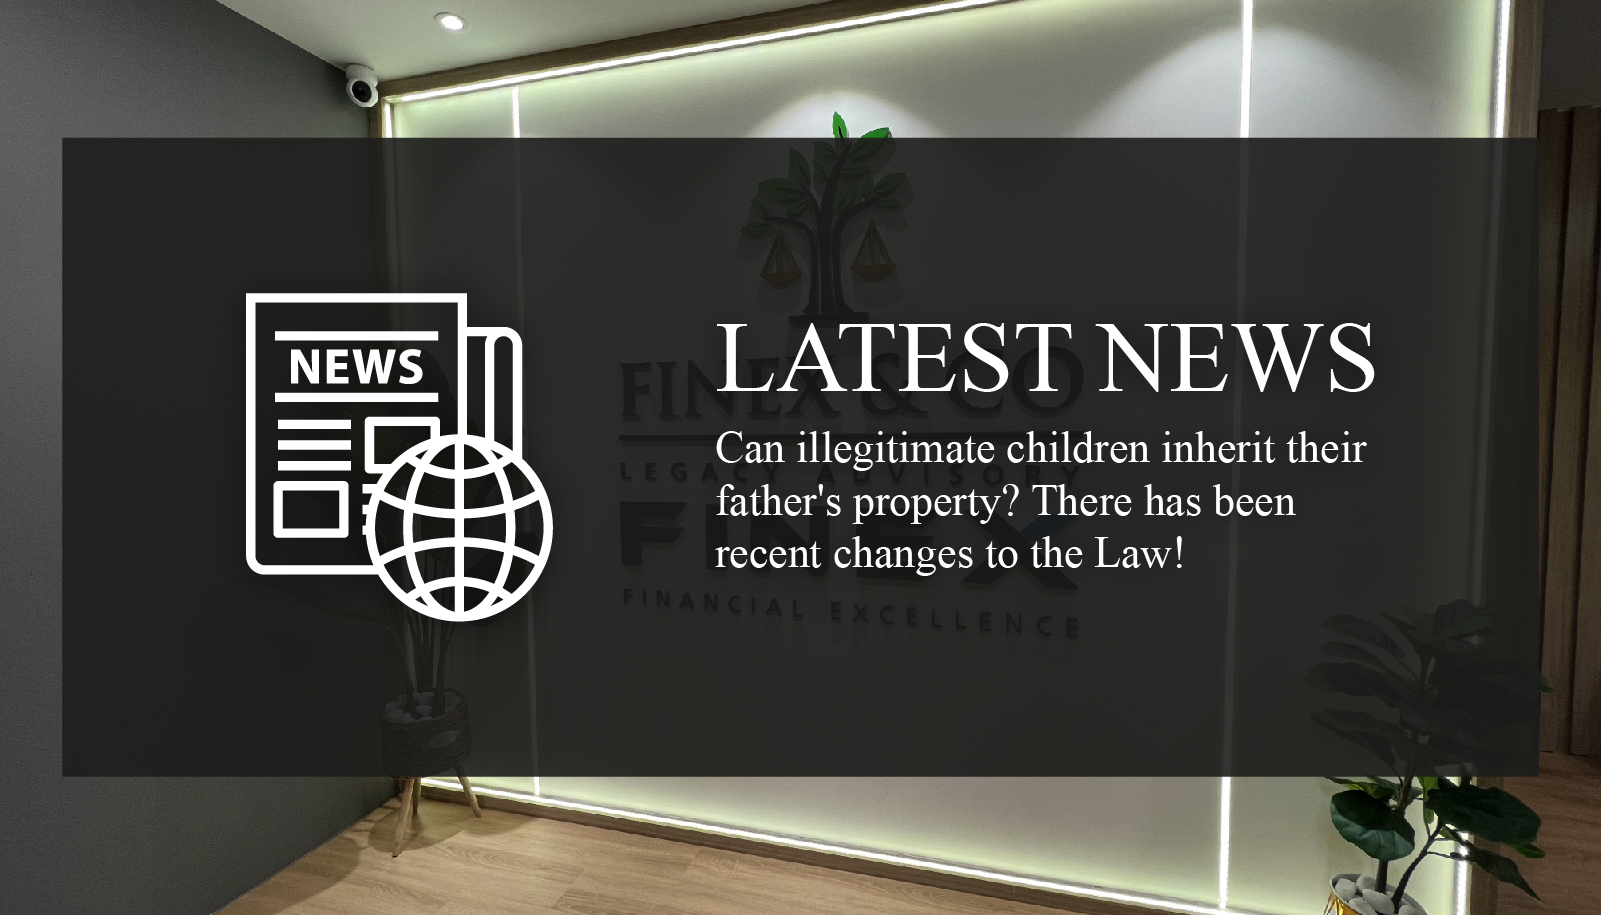 Can illegitimate children inherit their father’s property? There has been recent changes to the Law!